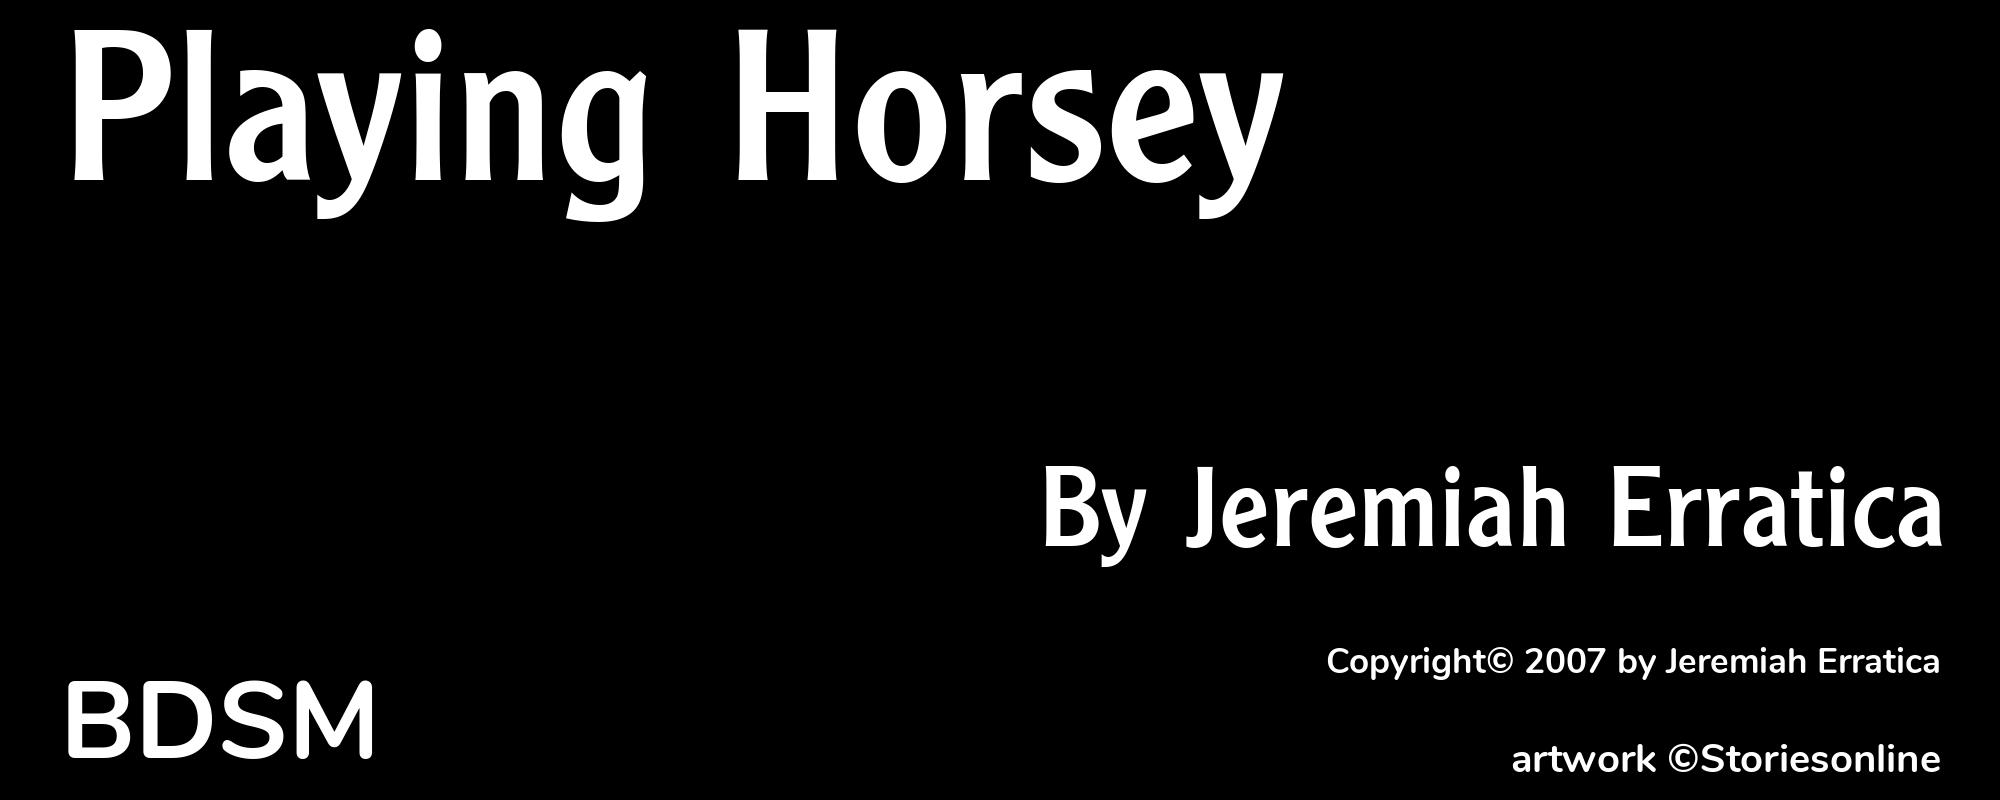 Playing Horsey - Cover